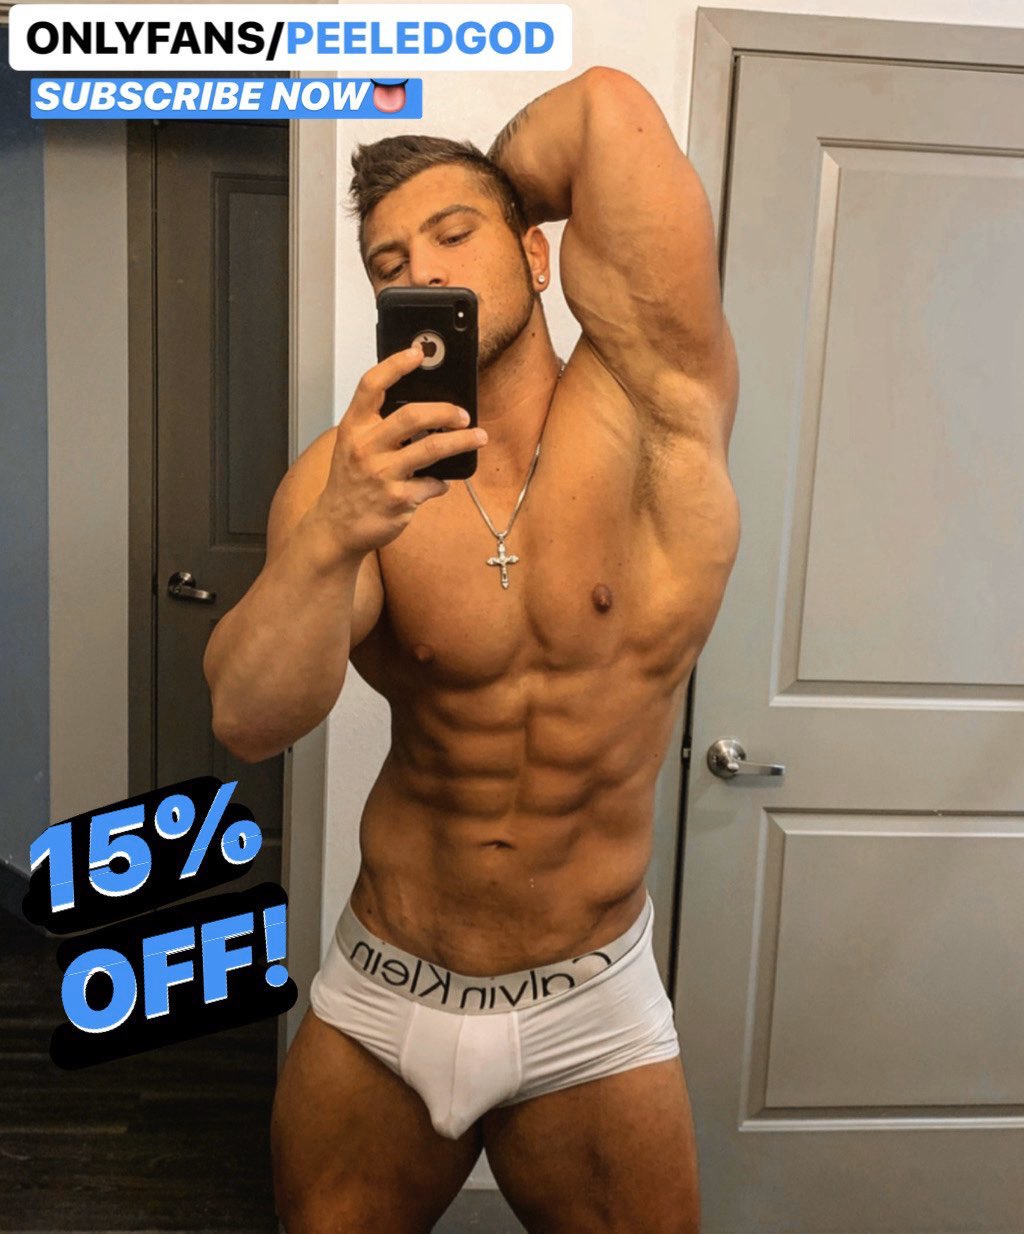 Best Free Onlyfans Like There Is No Tomorrow.